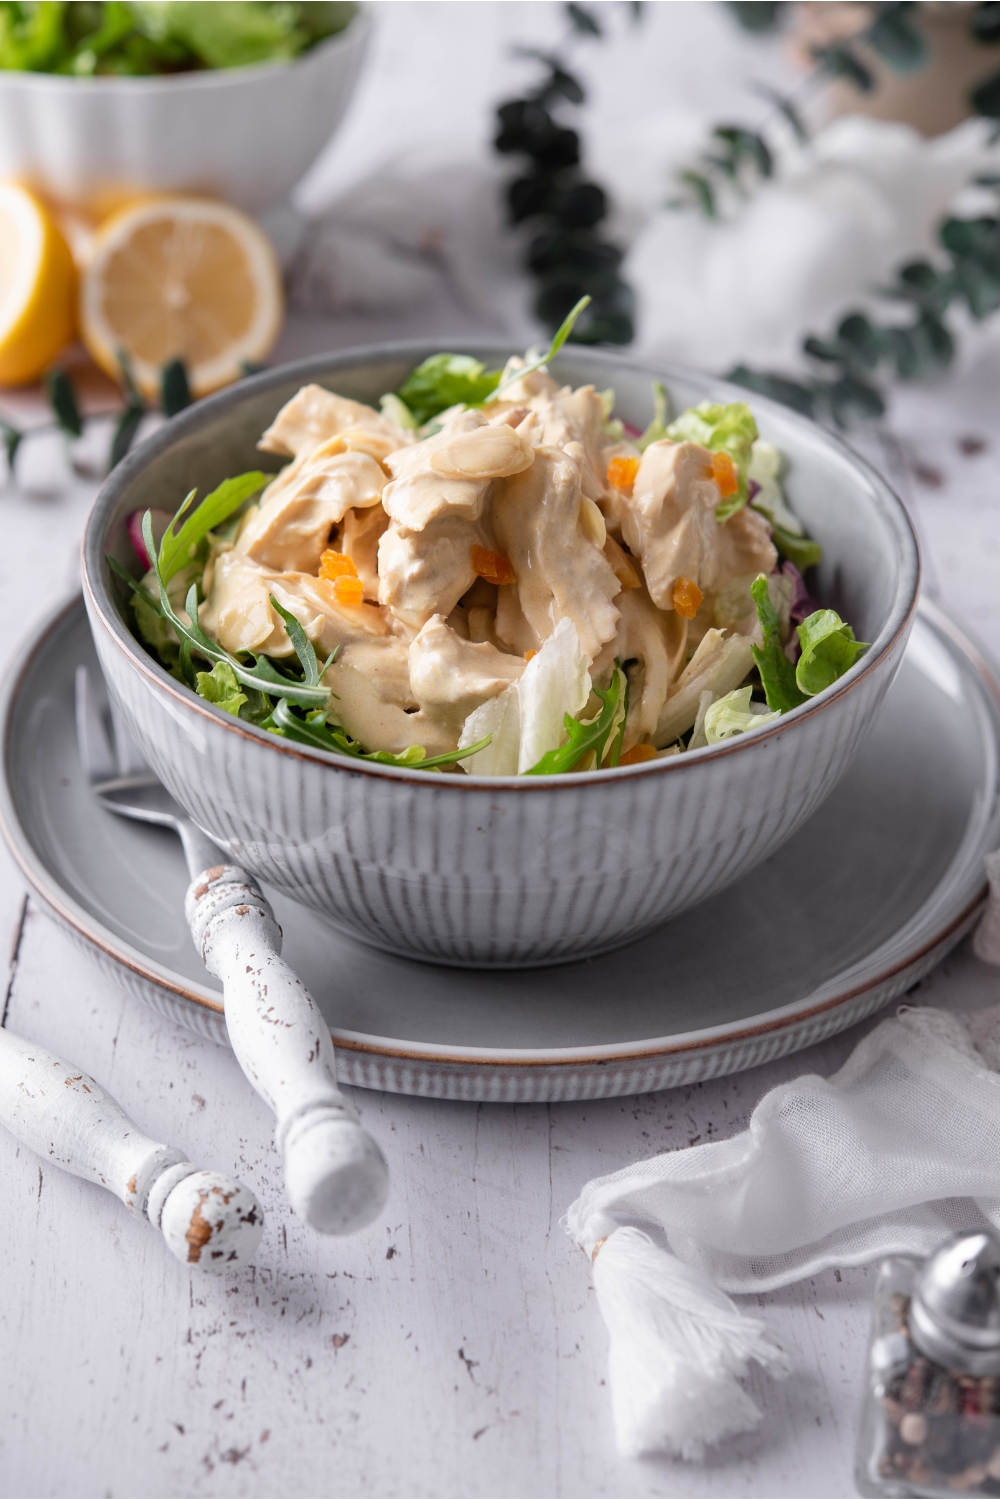 A blue bowl filled with coronation chicken salad atop a bed of greens. The bowl is on a blue plate and there is a fork on the plate.